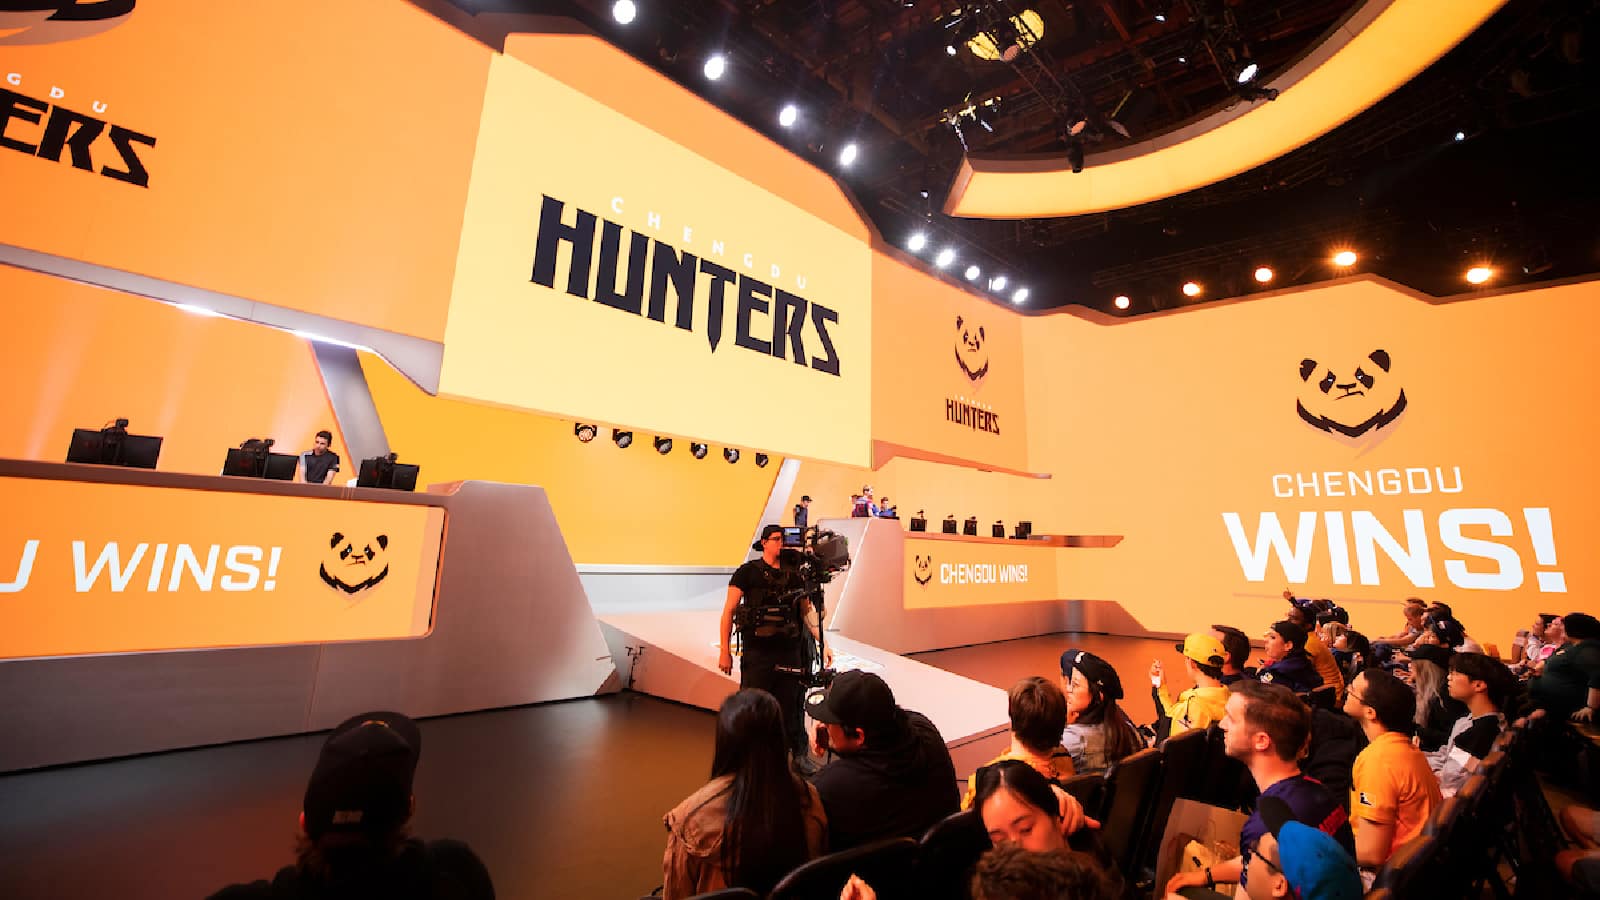 Chengdu Hunters on the OWL stage